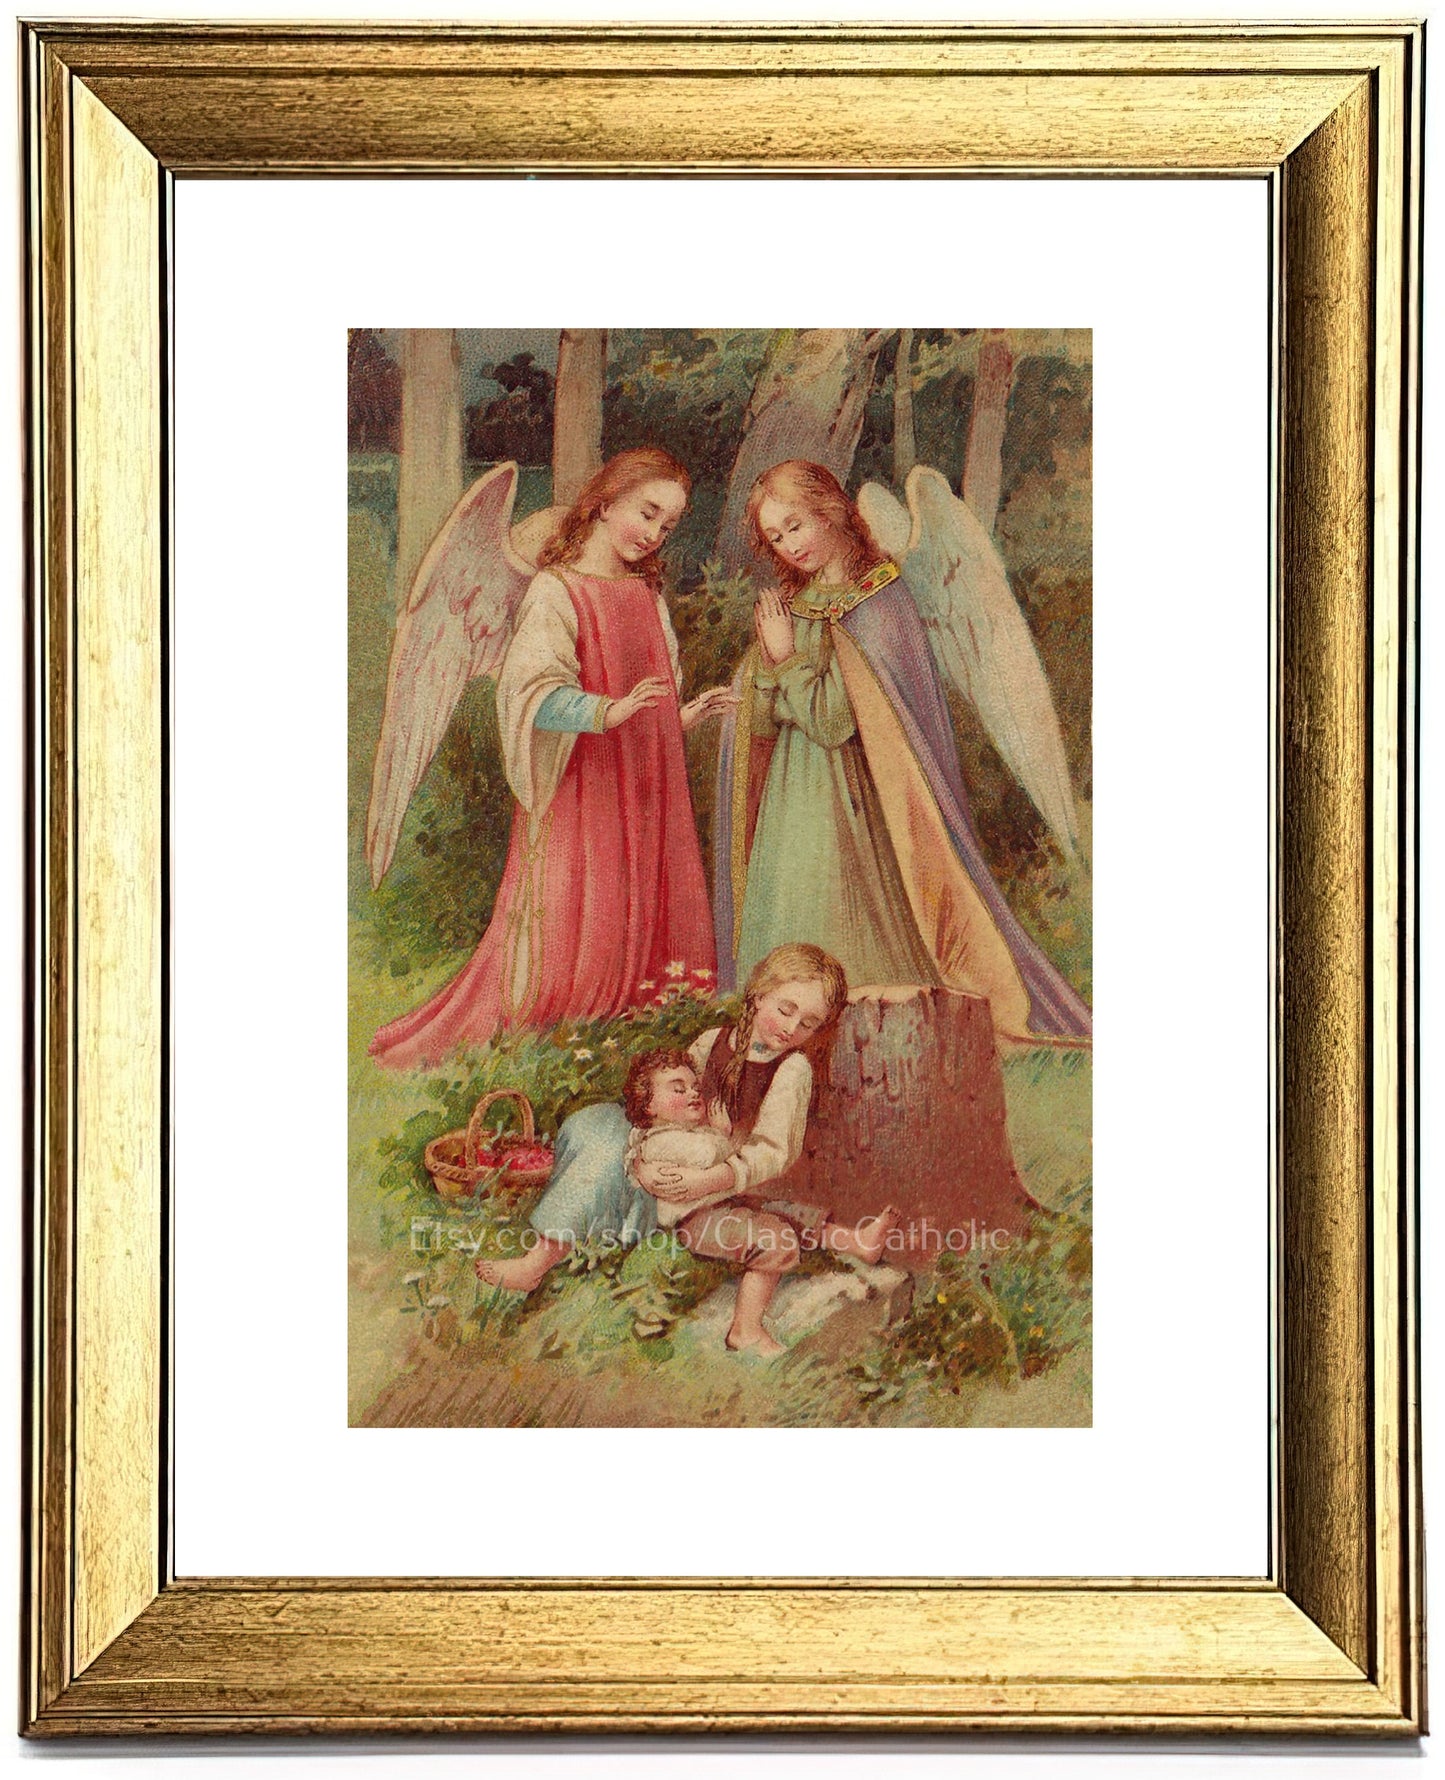 Guardian Angels – based on a Vintage Holy Card – Cozy – Catholic Art Print – Archival Quality